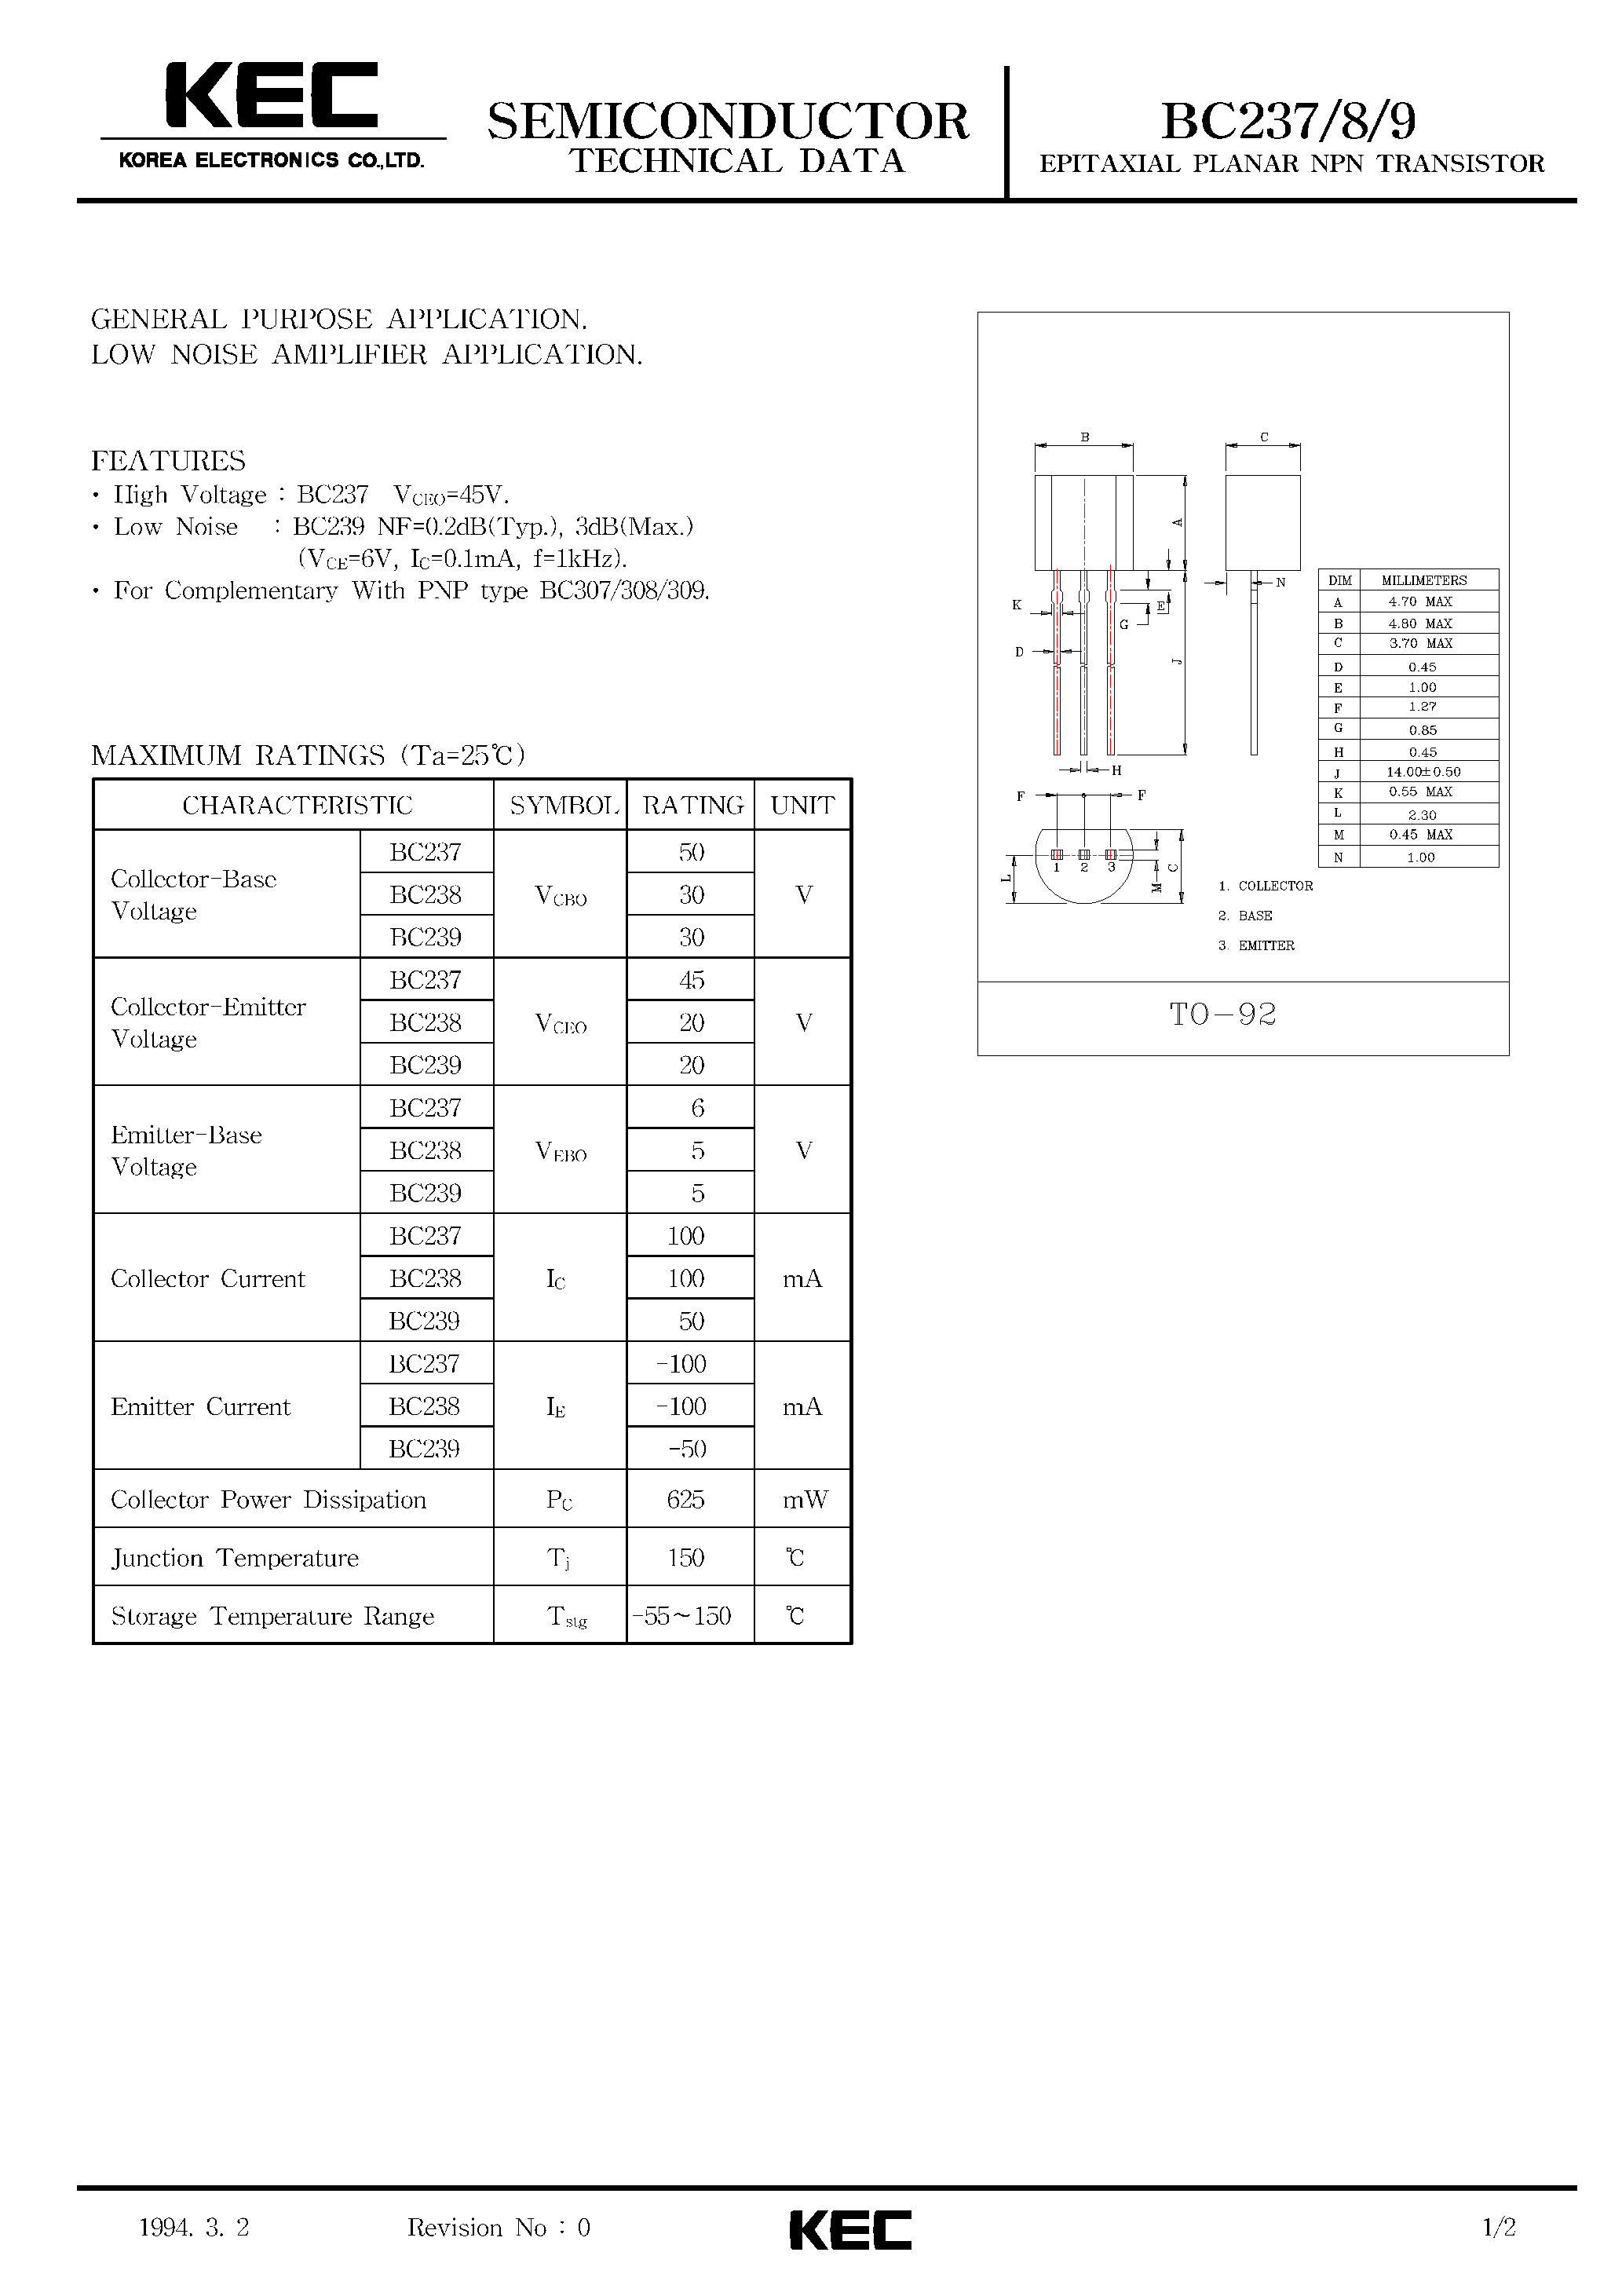 Даташит BC237 - EPITAXIAL PLANAR NPN TRANSISTOR (GENERAL PURPOSE / LOW NOISE AMPLIFIER) страница 1